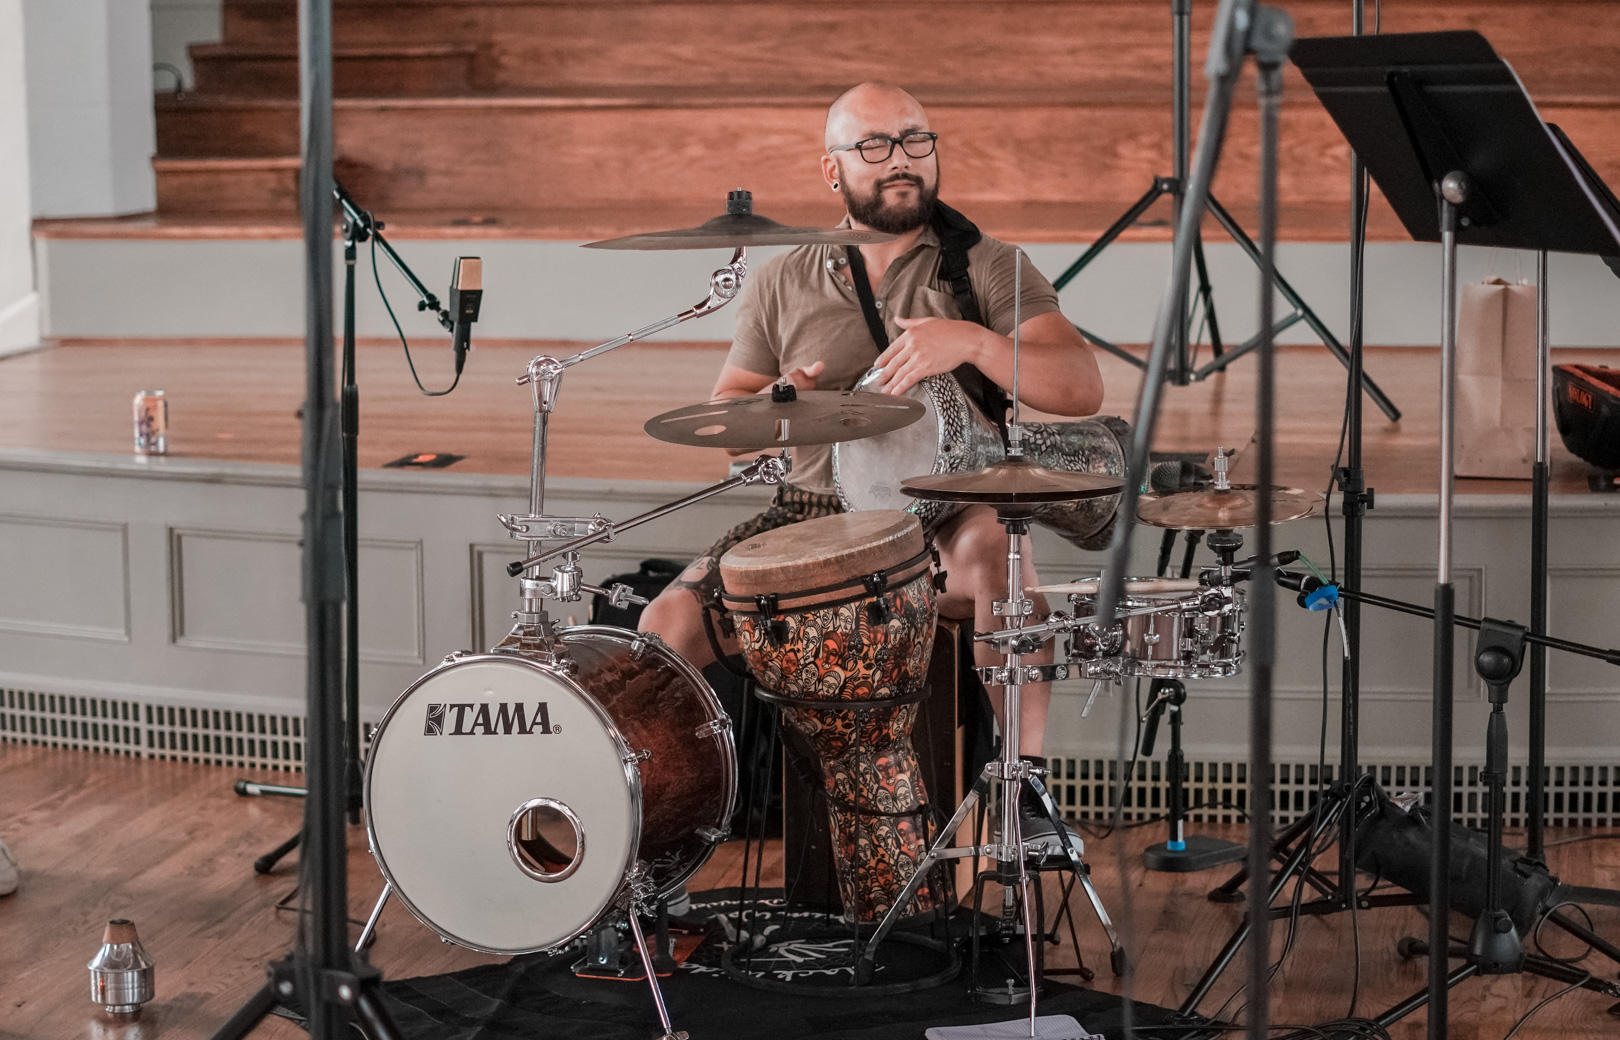 A young man plays drums and percussion